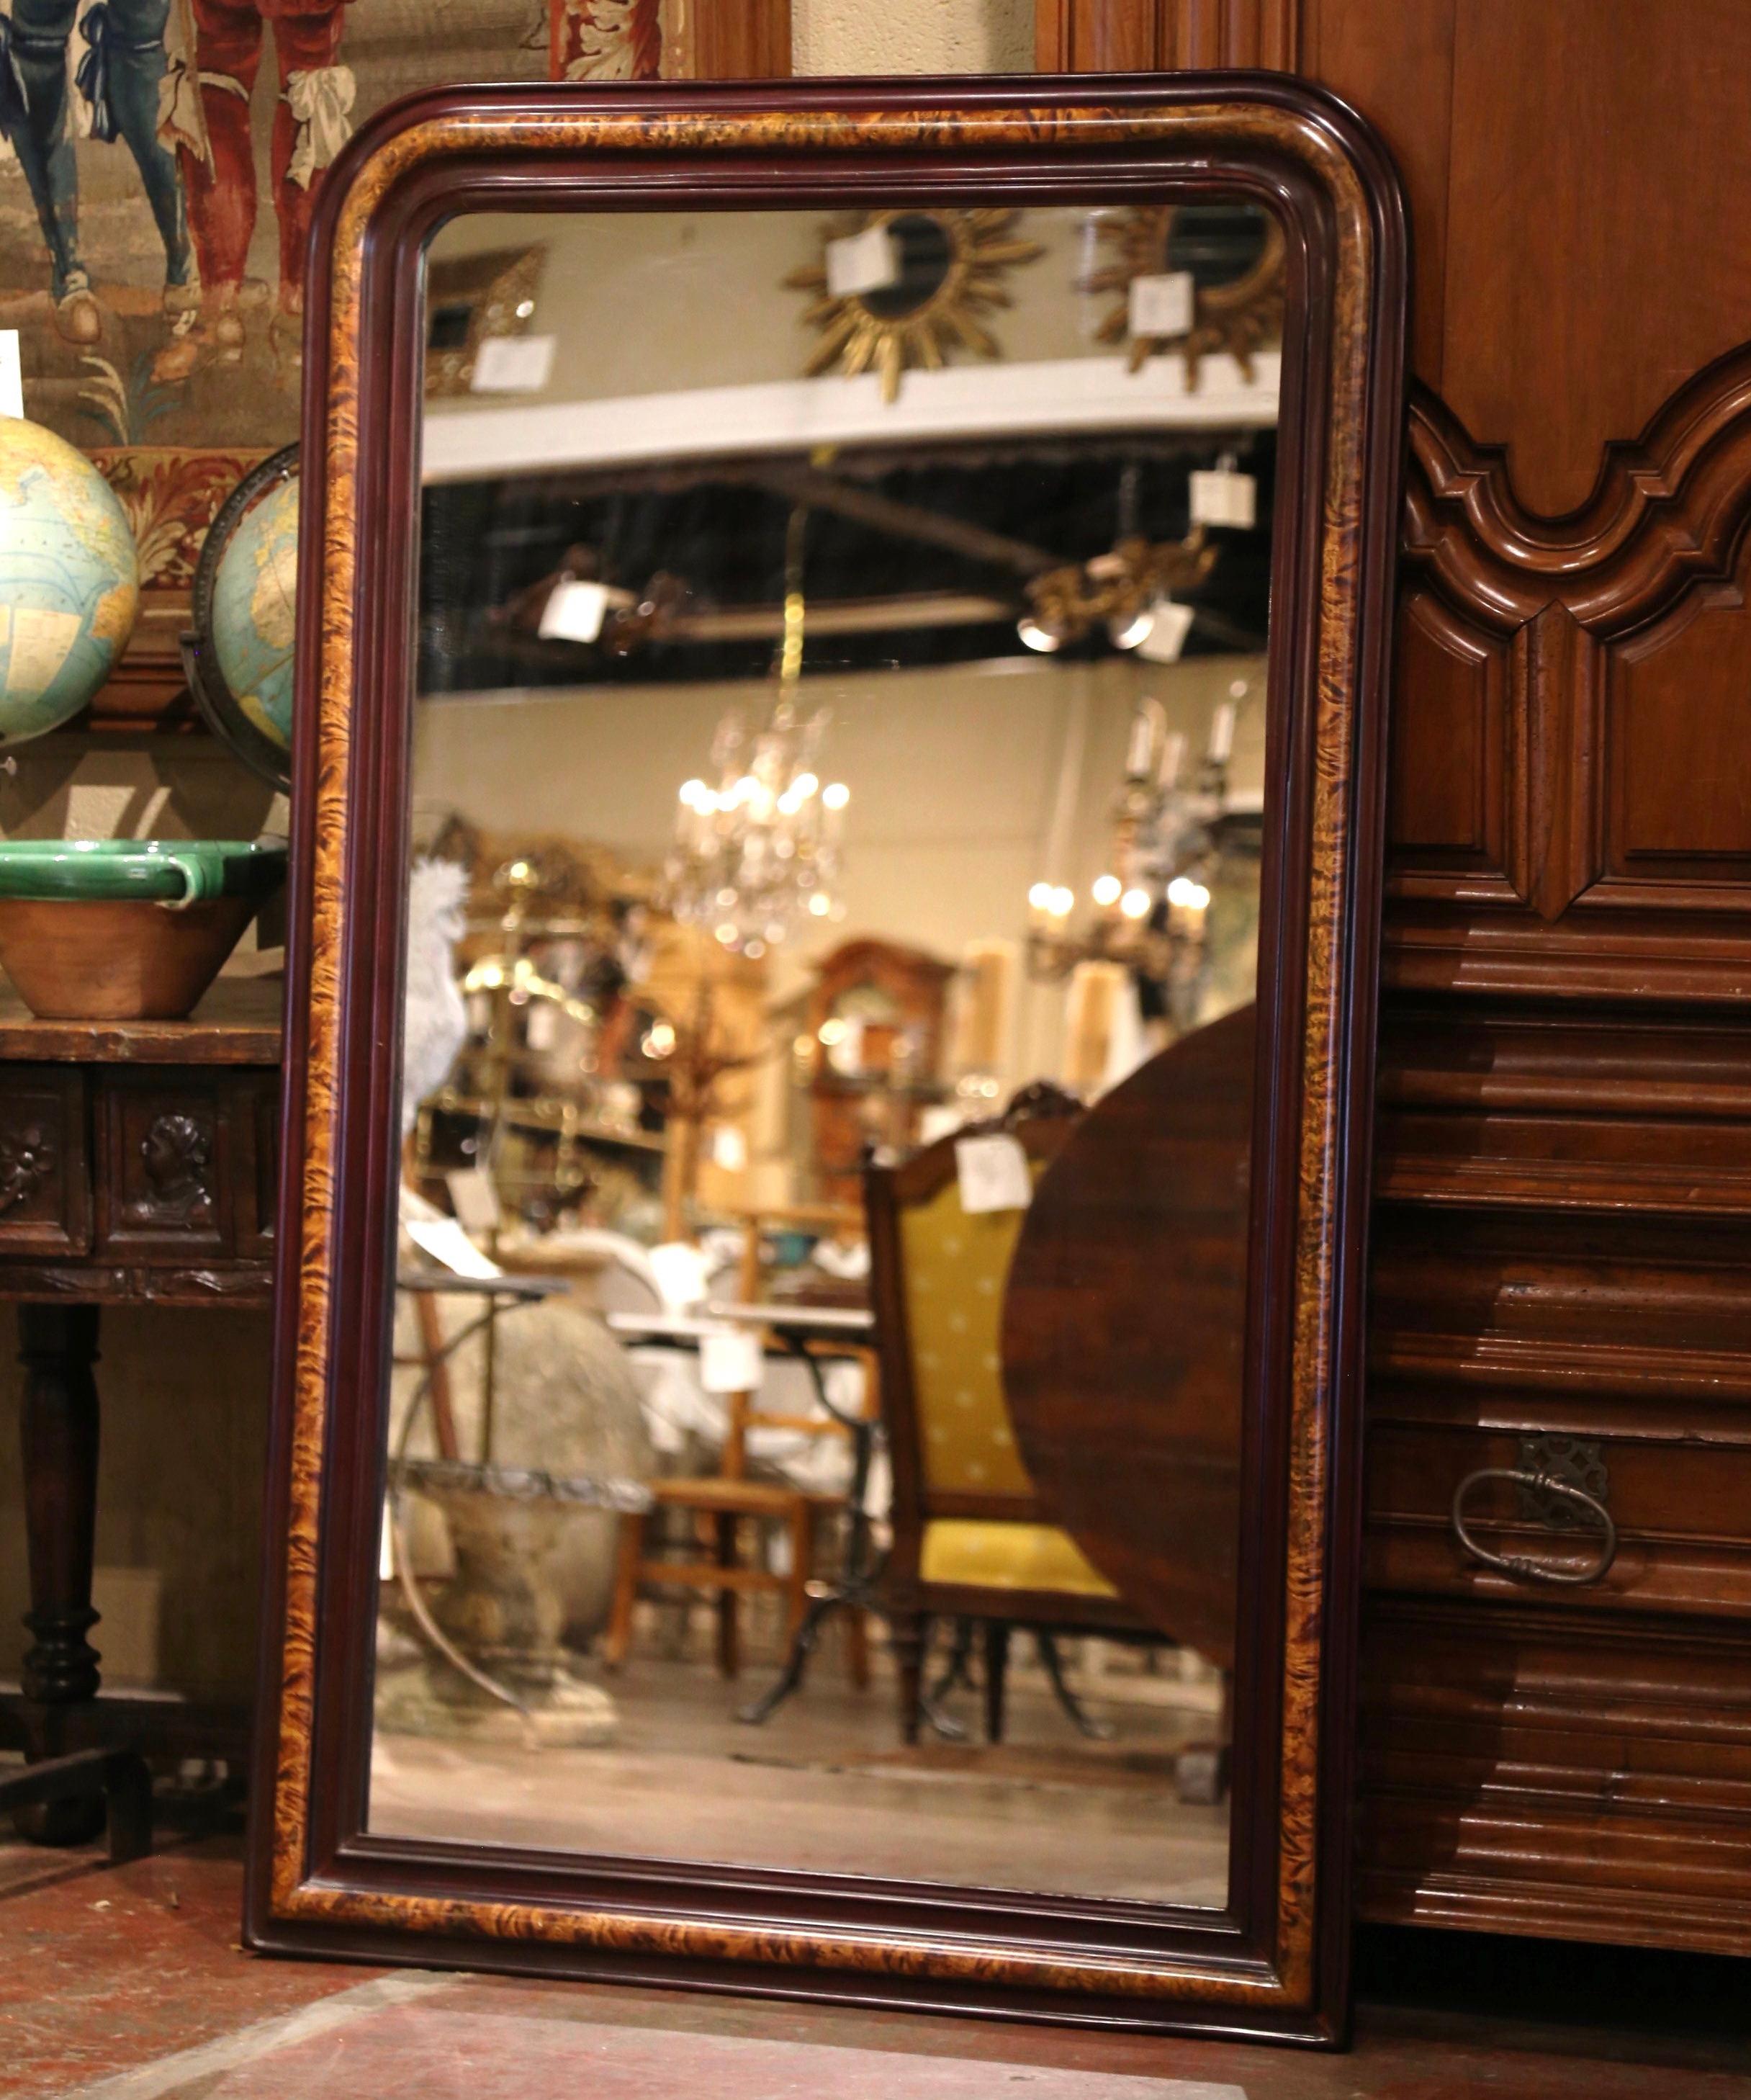 This elegant antique wall mirror was crafted in France, circa 1870. The tall frame is decorated with faux burl wood motifs in between patinated red paint finish. The large Louis Philippe two-tone mirror is in excellent condition with its mirrored